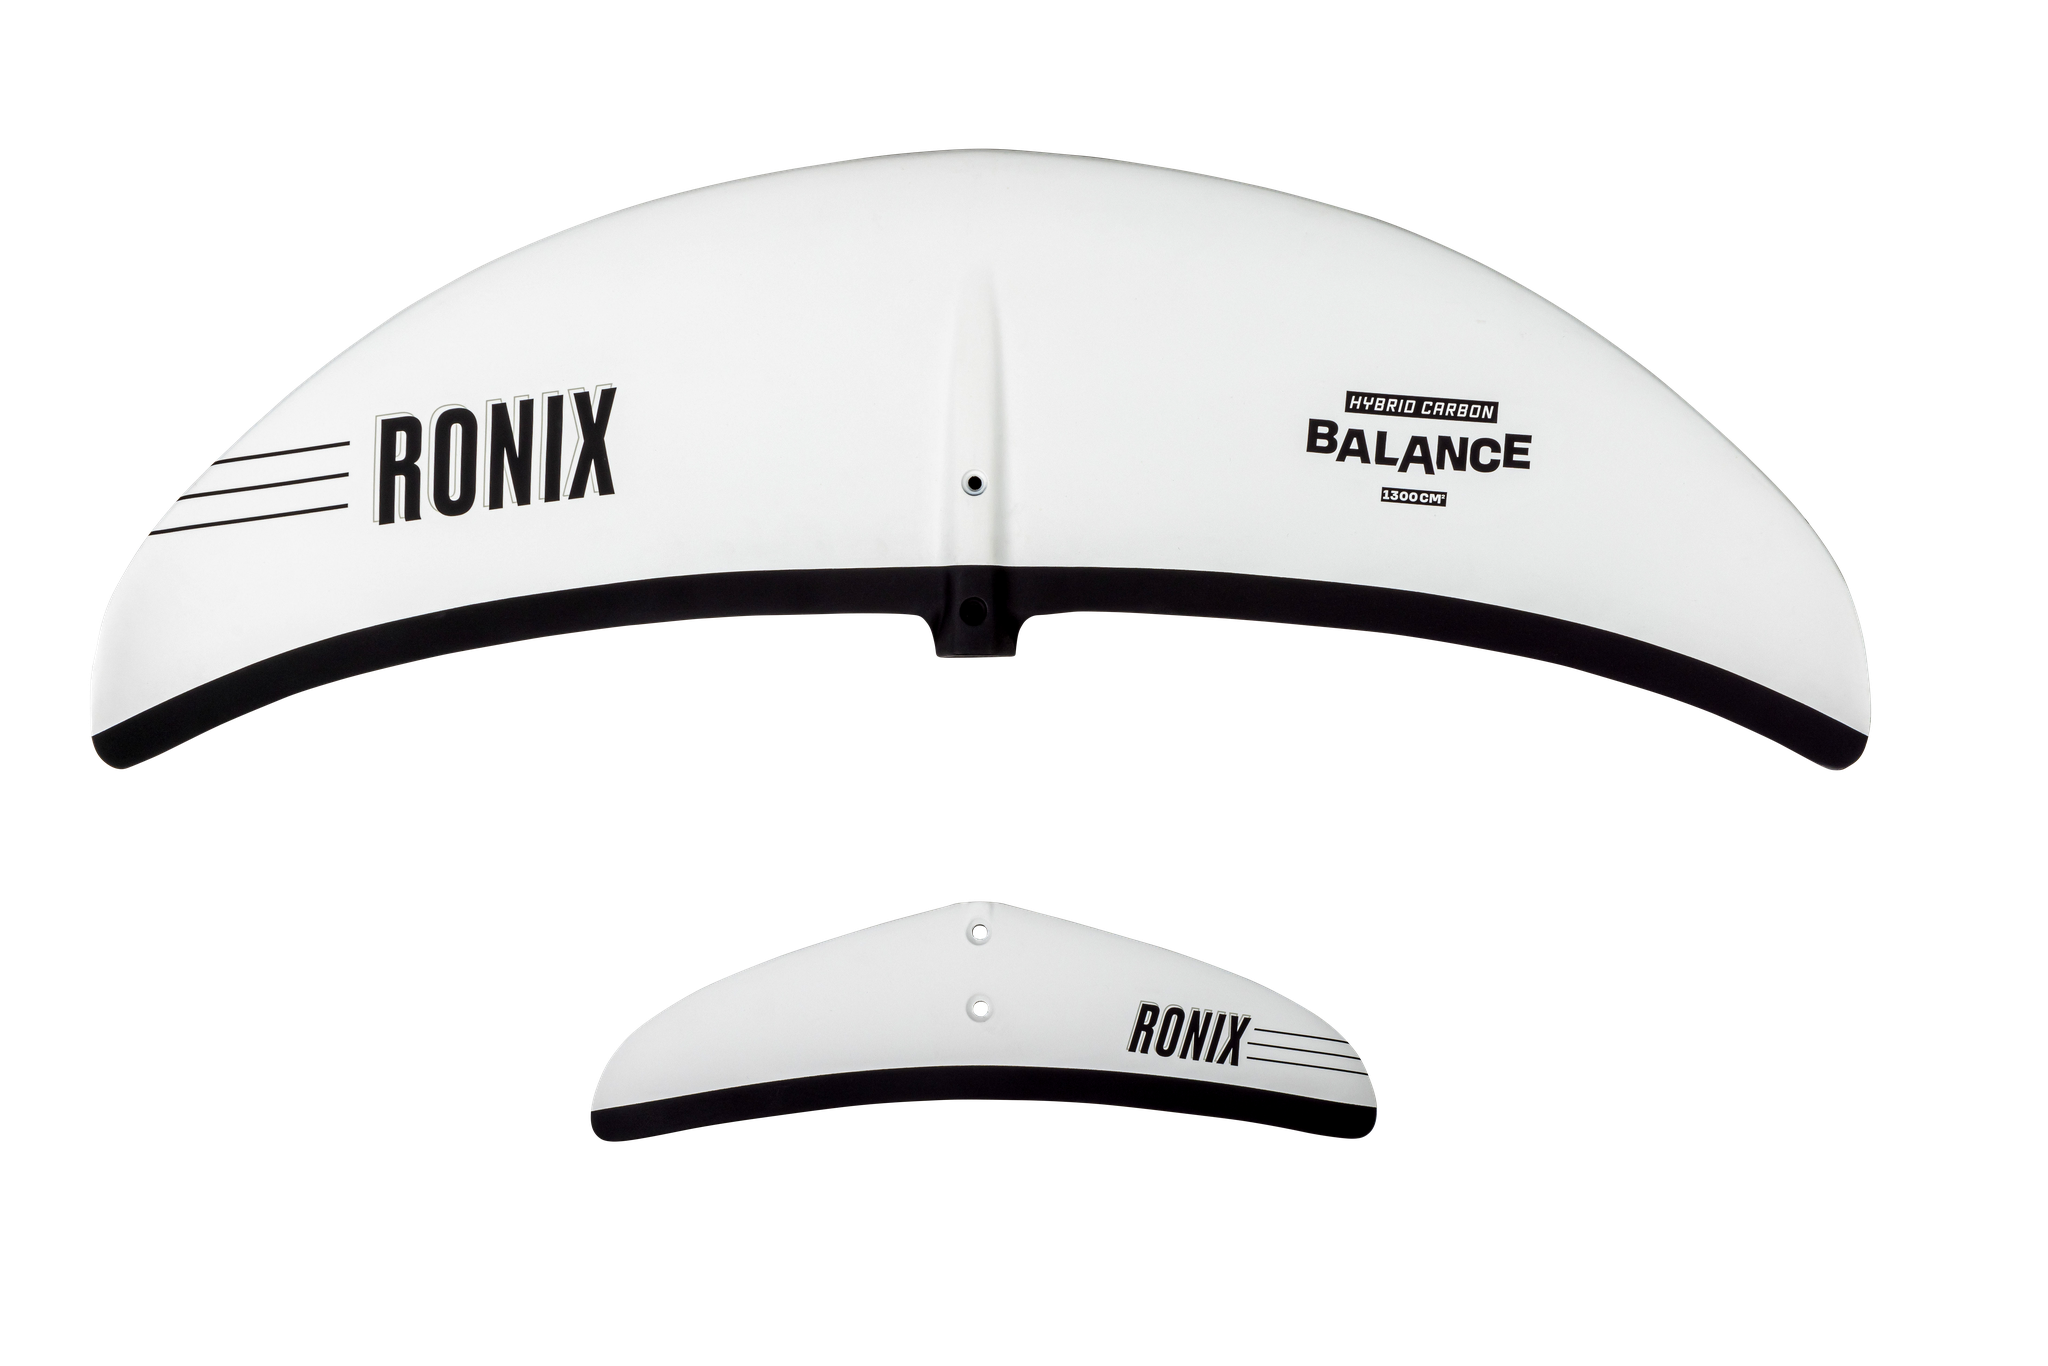 A white and black Ronix Koal Surface 727 Foil | Beginner-Intermediate Hybrid Series kite, featuring a telescoping adjustable mast for optimal foiling.